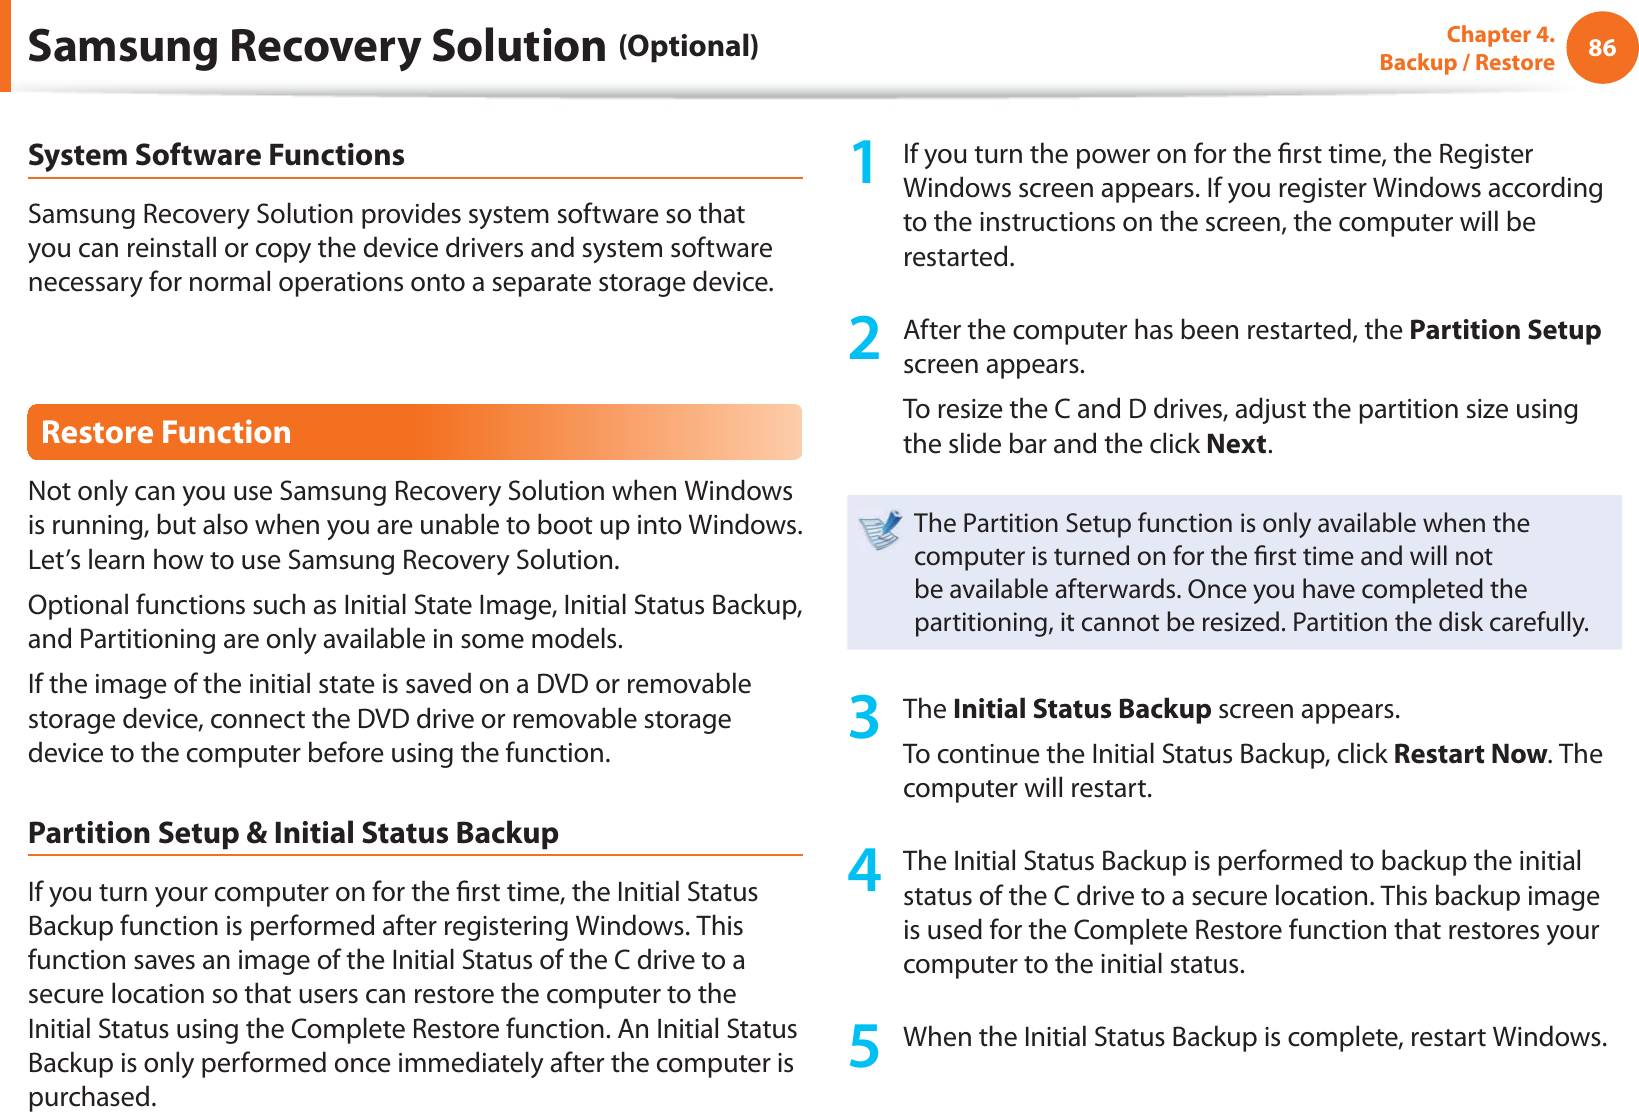 86Chapter 4.  Backup / RestoreSystem Software FunctionsSamsung Recovery Solution provides system software so that you can reinstall or copy the device drivers and system software necessary for normal operations onto a separate storage device.Restore FunctionNot only can you use Samsung Recovery Solution when Windows is running, but also when you are unable to boot up into Windows. Let’s learn how to use Samsung Recovery Solution.Optional functions such as Initial State Image, Initial Status Backup, and Partitioning are only available in some models.If the image of the initial state is saved on a DVD or removable storage device, connect the DVD drive or removable storage device to the computer before using the function.Partition Setup &amp; Initial Status BackupIf you turn your computer on for the  rst time, the Initial Status Backup function is performed after registering Windows. This function saves an image of the Initial Status of the C drive to a secure location so that users can restore the computer to the Initial Status using the Complete Restore function. An Initial Status Backup is only performed once immediately after the computer is purchased.1  If you turn the power on for the  rst time, the Register Windows screen appears. If you register Windows according to the instructions on the screen, the computer will be restarted.2  After the computer has been restarted, the Partition Setup screen appears. To resize the C and D drives, adjust the partition size using the slide bar and the click Next.The Partition Setup function is only available when the computer is turned on for the  rst time and will not be available afterwards. Once you have completed the partitioning, it cannot be resized. Partition the disk carefully.3 The Initial Status Backup screen appears. To continue the Initial Status Backup, click Restart Now. The computer will restart.4  The Initial Status Backup is performed to backup the initial status of the C drive to a secure location. This backup image is used for the Complete Restore function that restores your computer to the initial status.5  When the Initial Status Backup is complete, restart Windows.Samsung Recovery Solution (Optional)